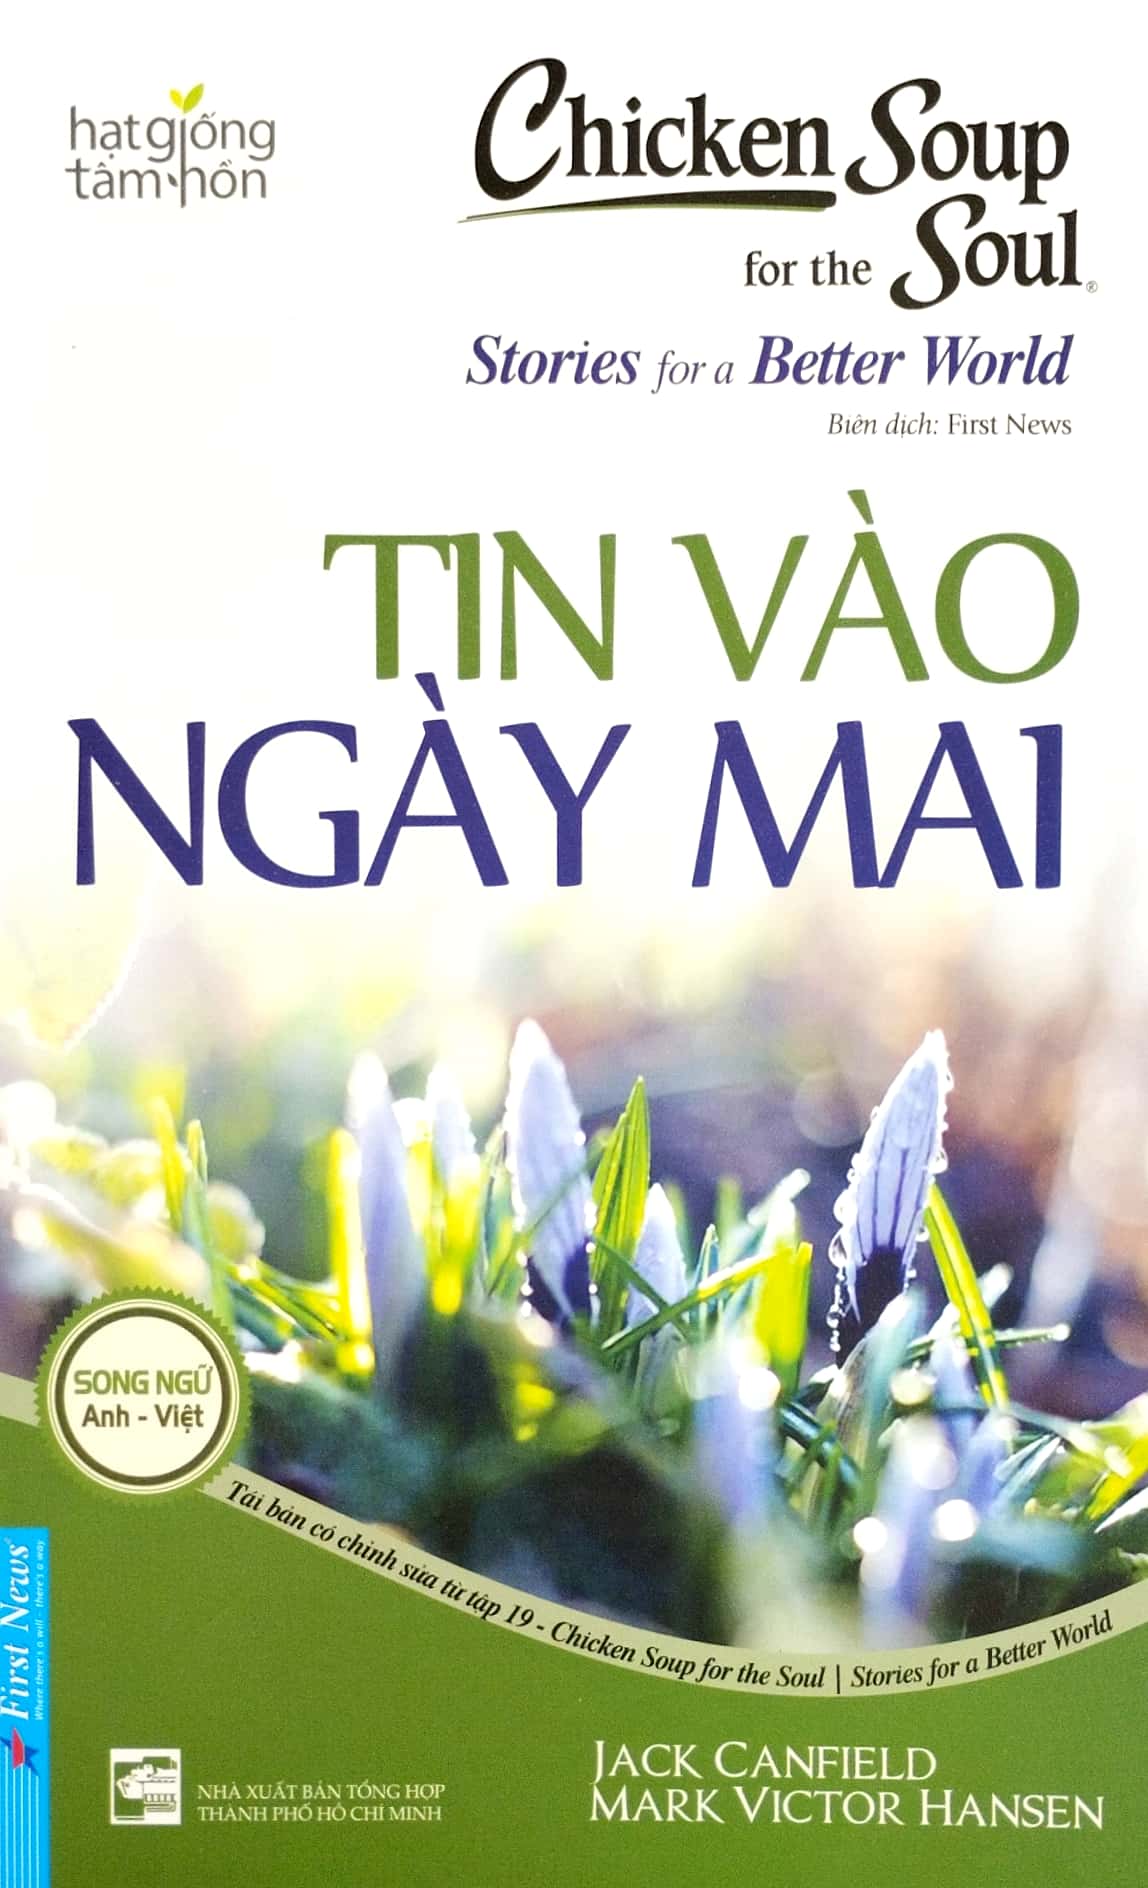 Chicken Soup For The Soul Stories For A Better World 19 - Tin Vào Ngày Mai PDF